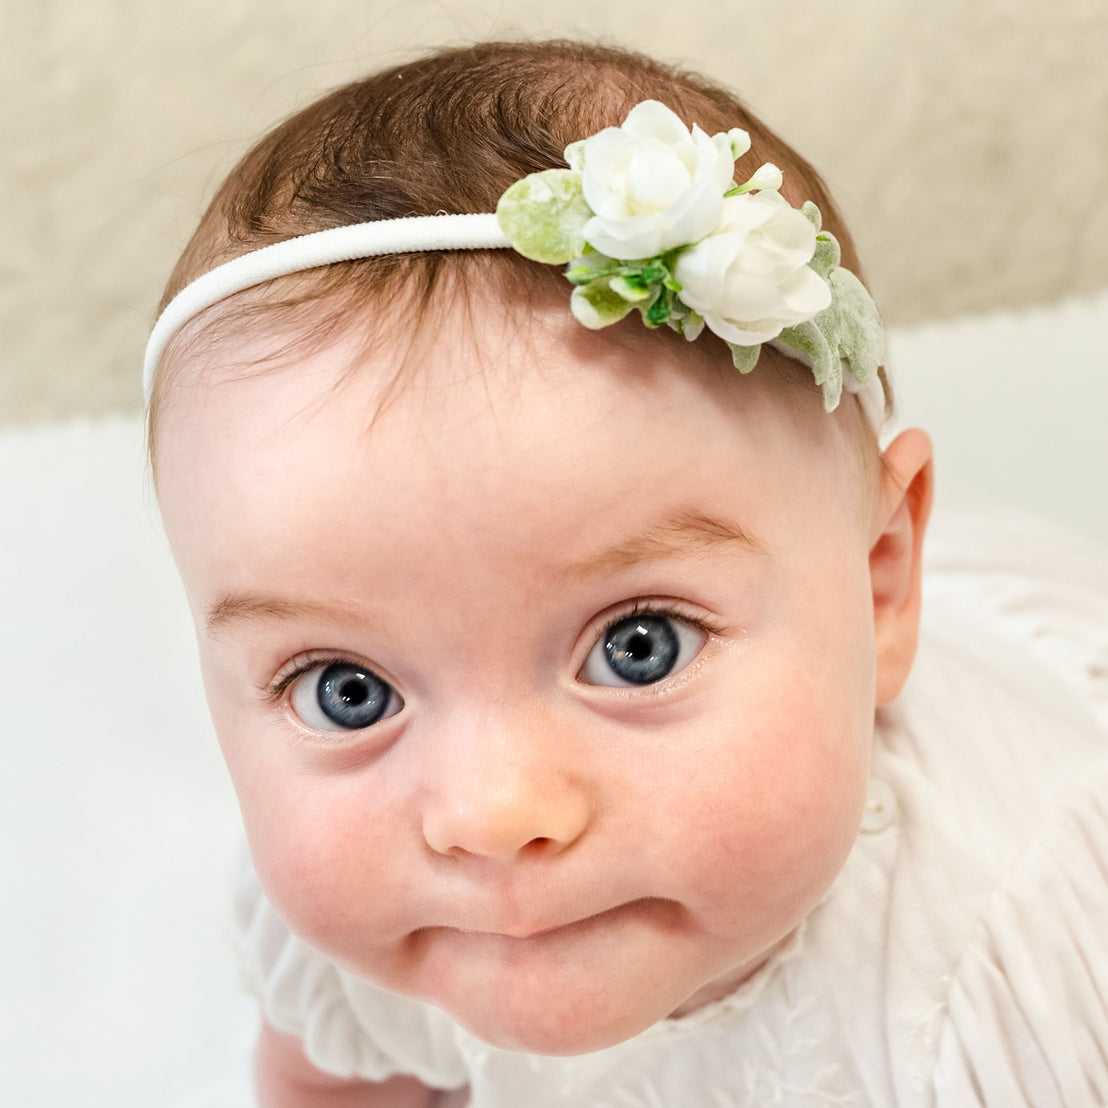 Baby wearing flower headband with small flowers